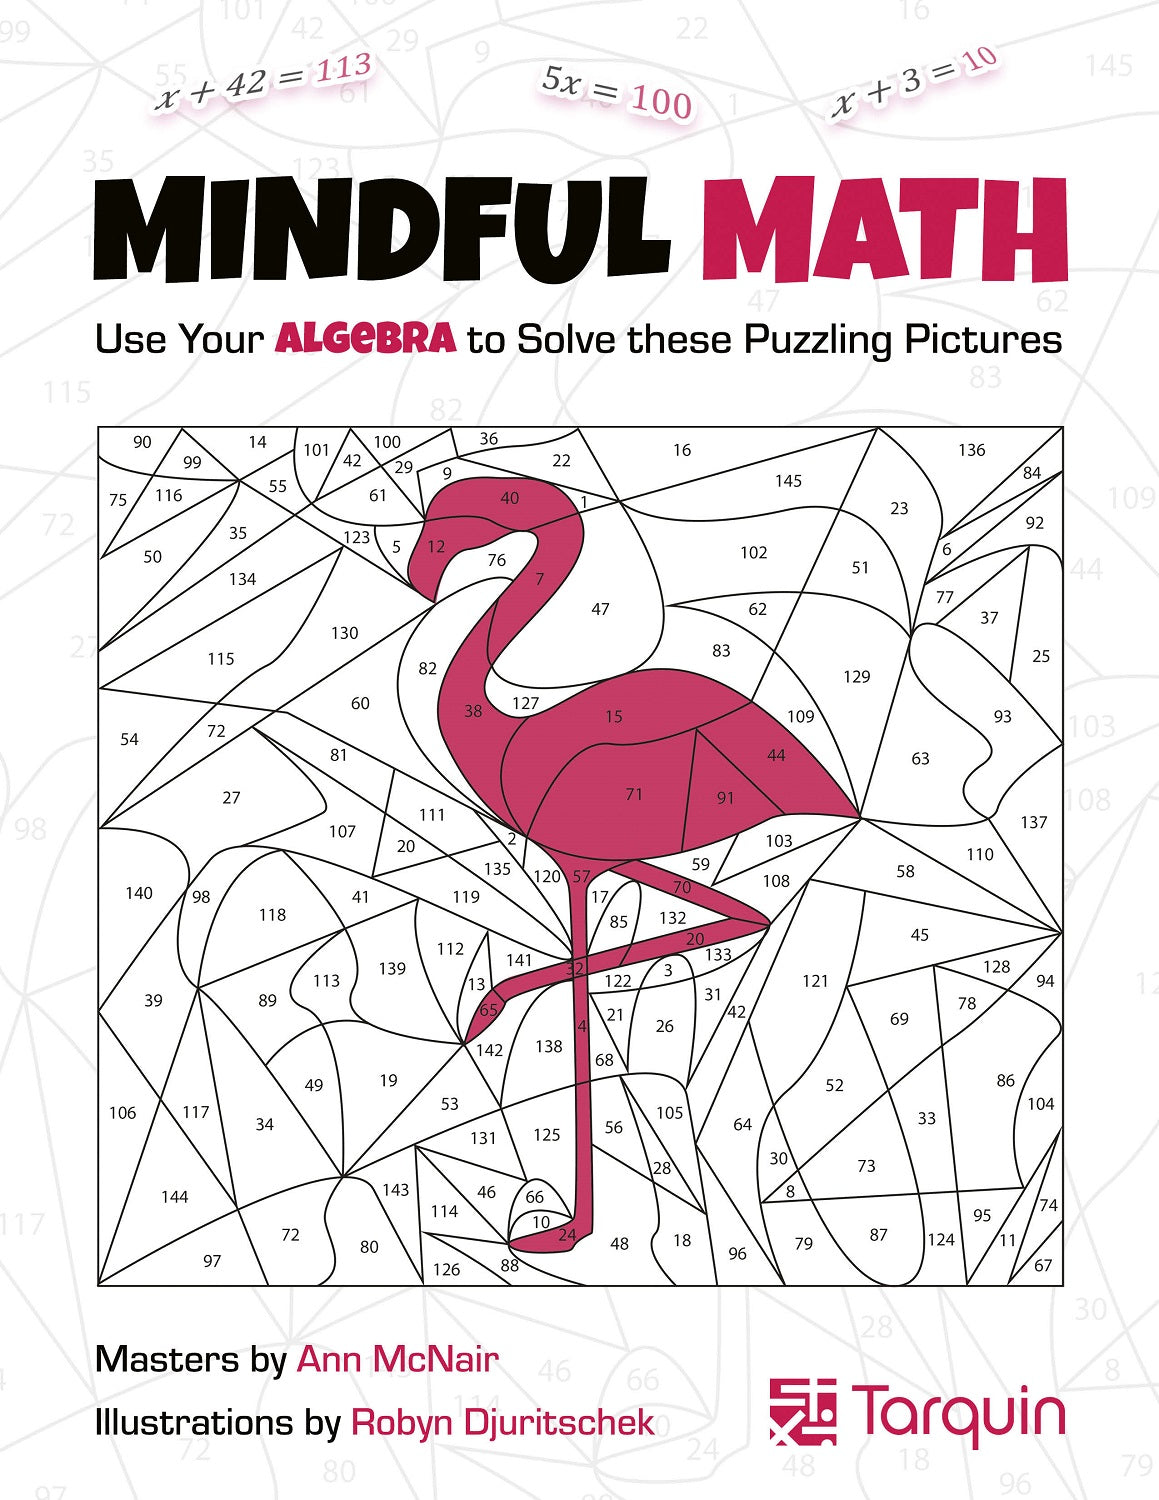 Mindful Maths - Use Your Algebra to Solve these Puzzling Pictures